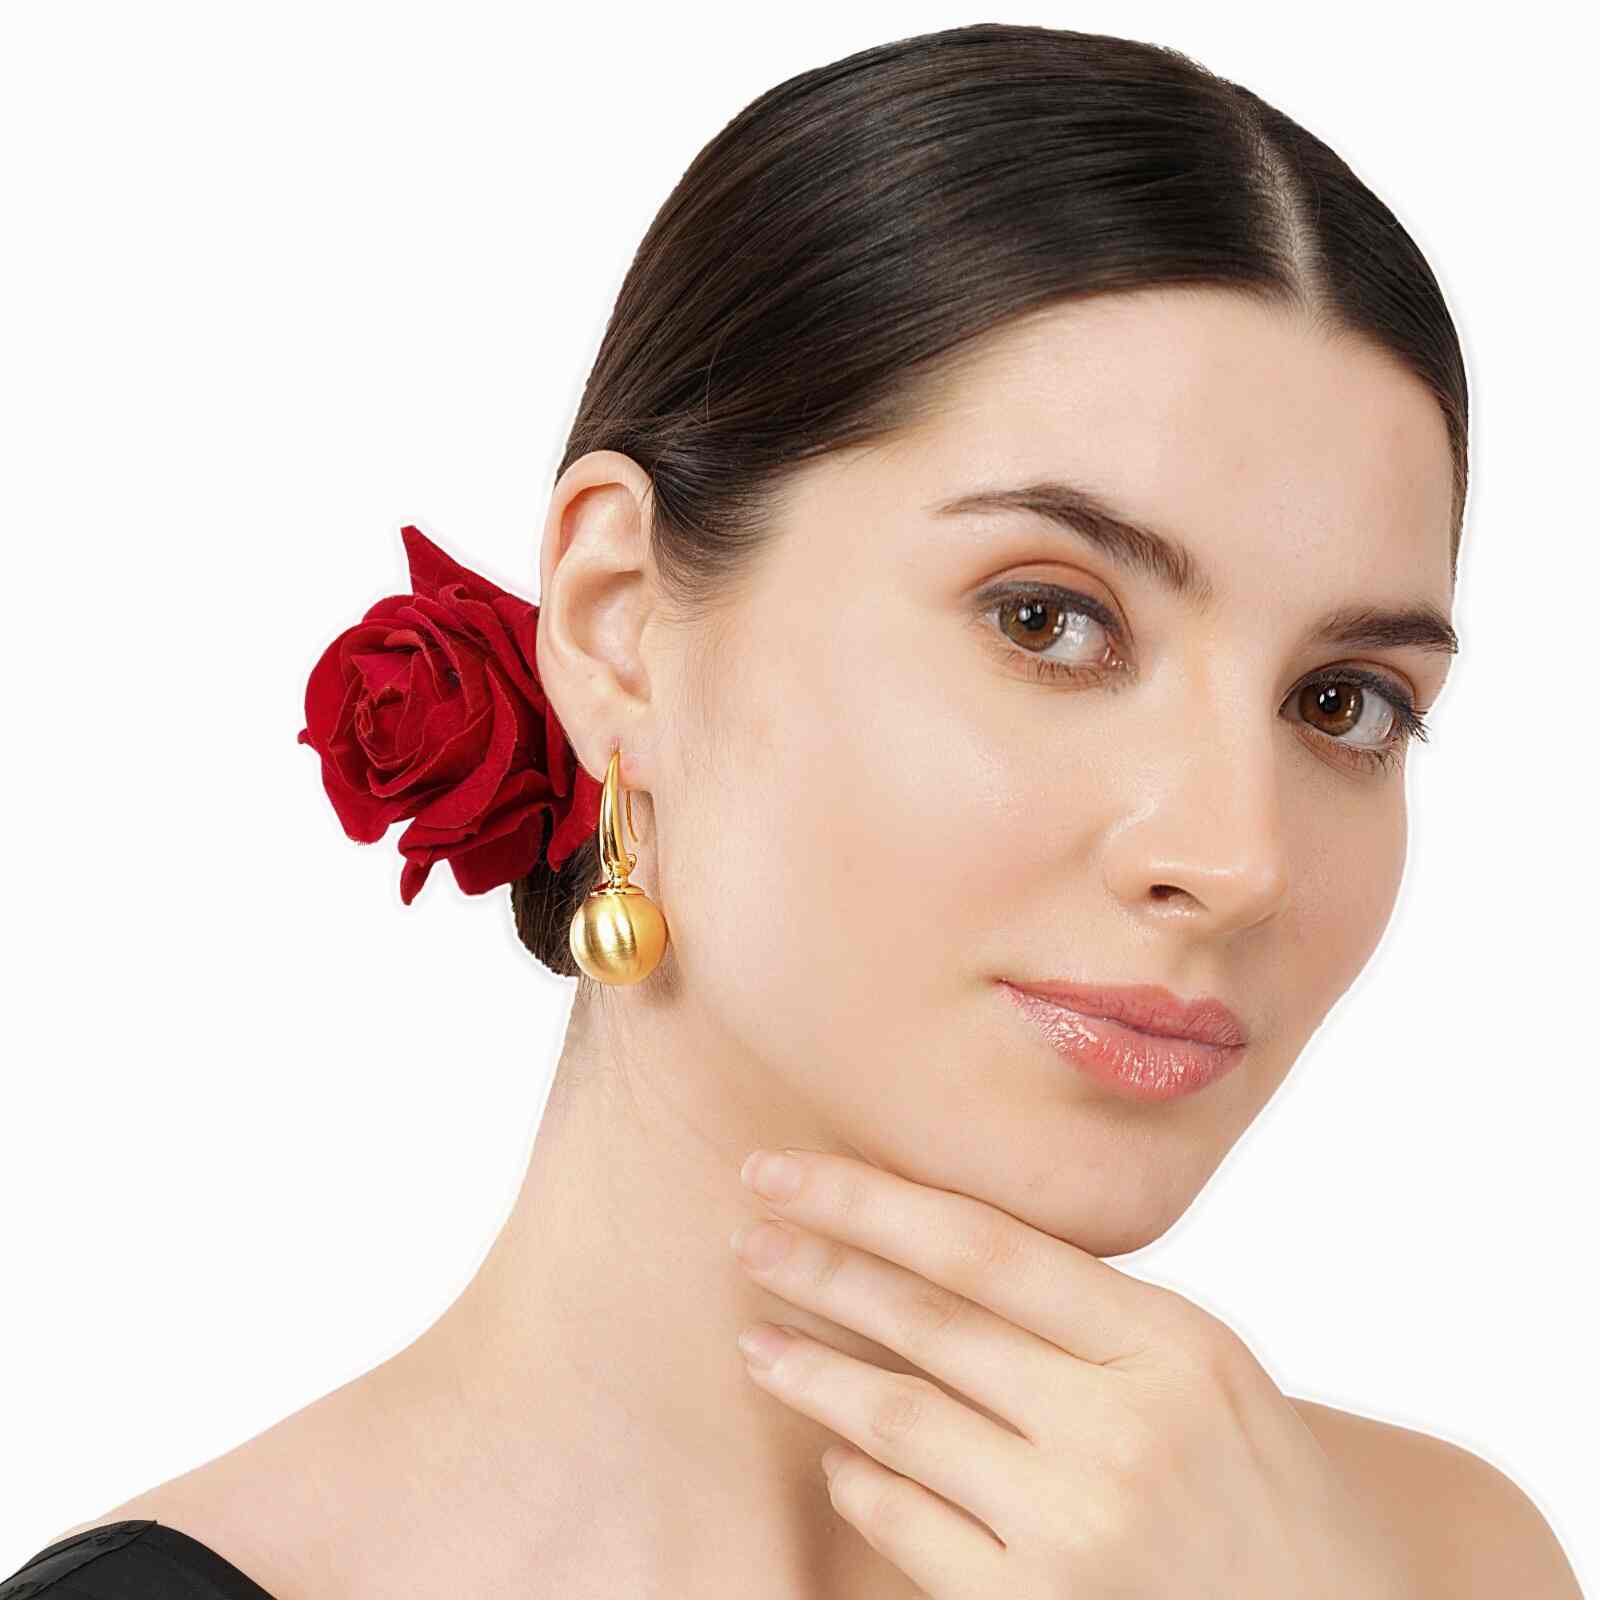 6 Gold Earrings Designs New Model 2023 - People choice